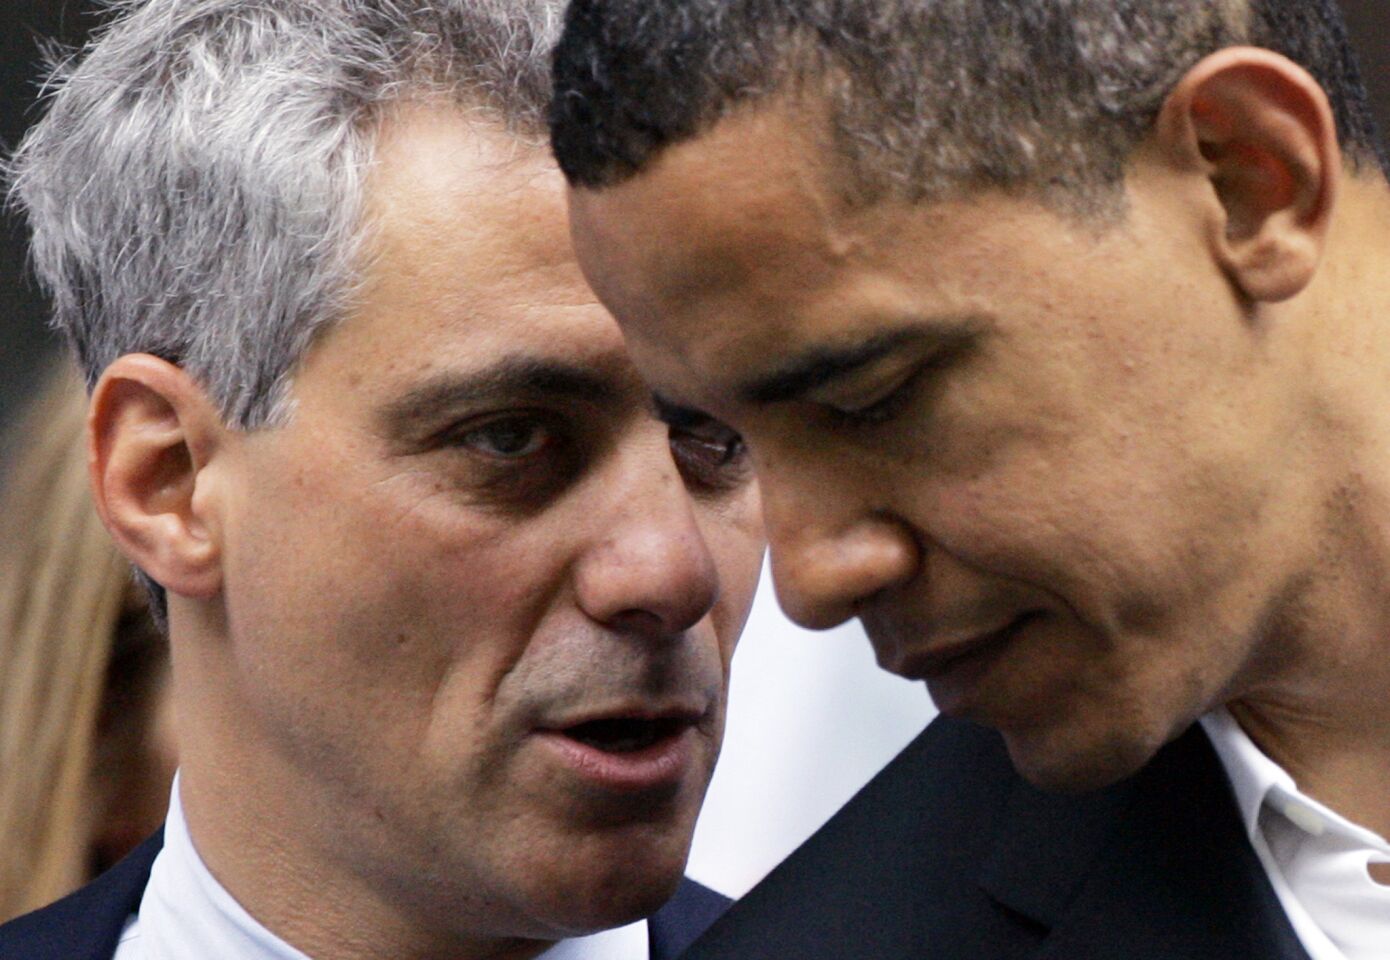 The spirited (and notoriously profane) Rahm Emanuel left Congress to serve as Obama's first chief of staff in 2009, and lasted more than a year until becoming mayor of Chicago in 2011.